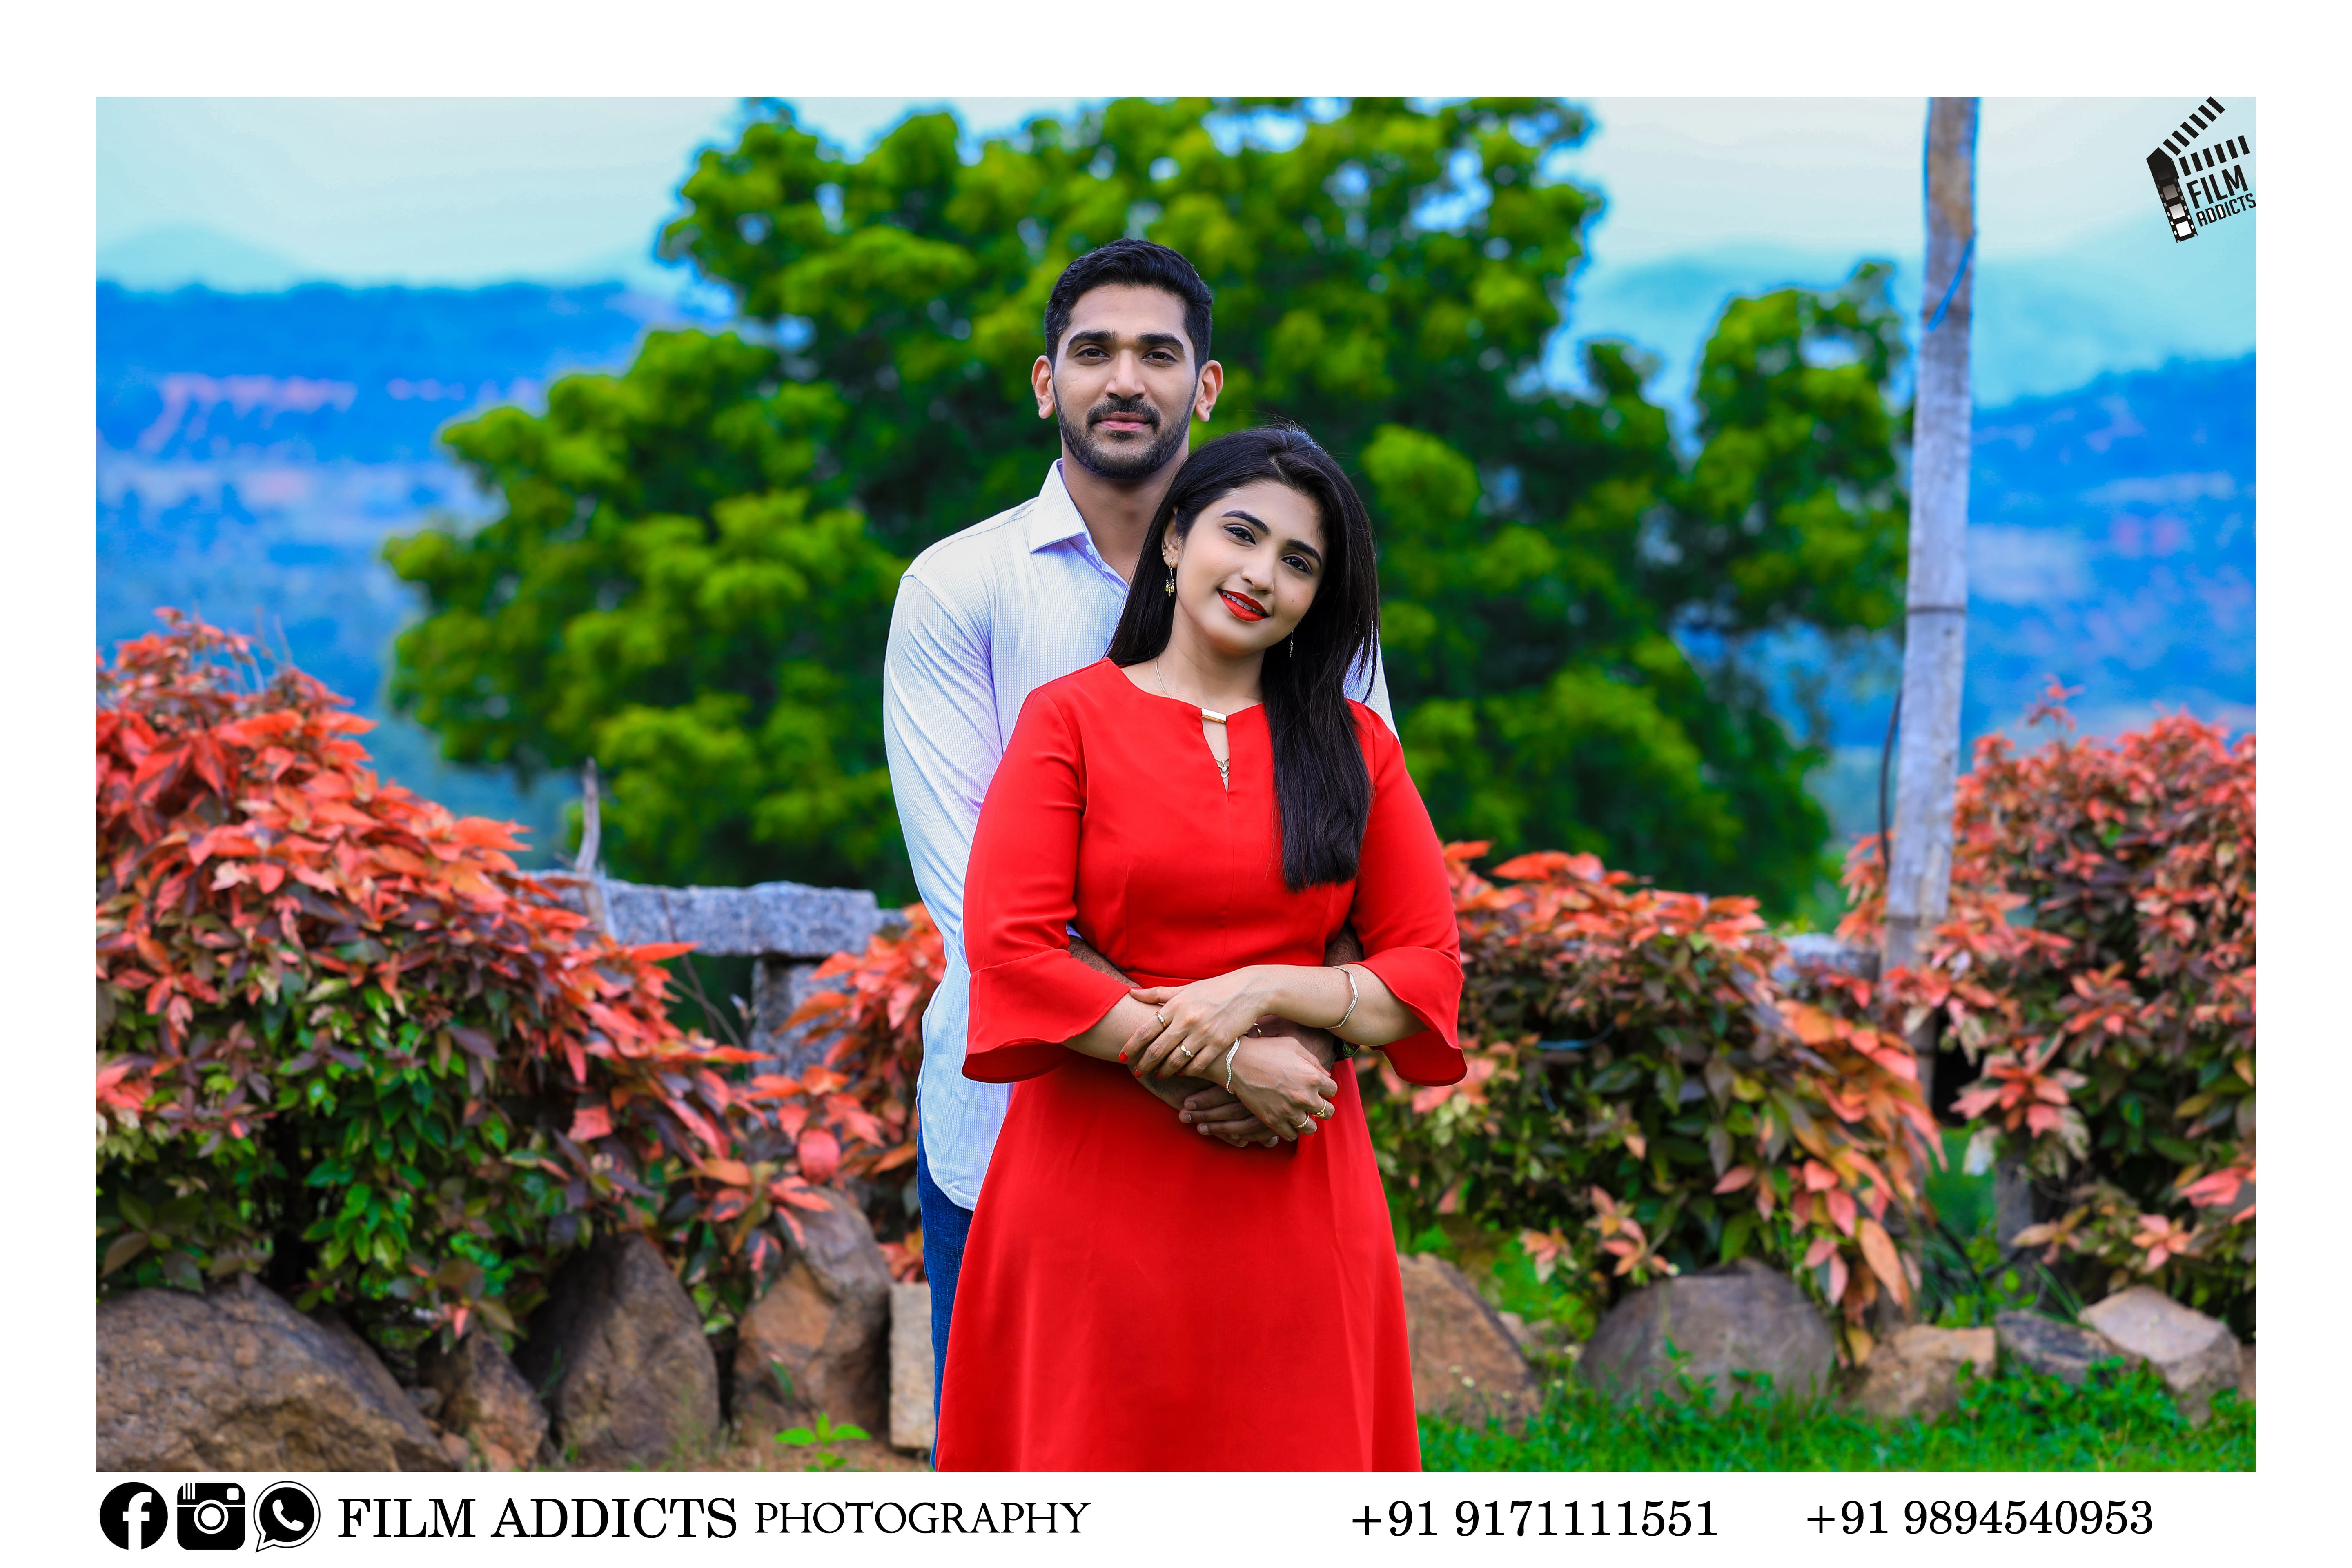 best-candid-photographers-in-Dindigul,Candid-photography-in-Dindigul,best-Outdoor -photography-in-Dindigul,
               Best-candid-photography-in-Dindigul,Best-candid-photographer,candid-photographer-in-Dindigul,drone-photographer-in-Dindigul,helicam-photographer-in-Dindigul,candid-Outdoor-photographers-in-Dindigul,photographers-in-Dindigul,
               professional-Outdoor-photographers-in-Dindigul,top-Outdoor-filmmakers-in-Dindigul,Outdoor-cinematographers-in-Dindigul,Outdoor-cinimatography-in-Dindigul,Outdoor-photographers-in-Dindigul,Outdoor-teaser-in-Dindigul,
               asian-Outdoor-photography-in-Dindigul,best-candid-photographers-in-Dindigul,best-candid-videographers-in-Dindigul,best-photographers-in-Dindigul,best-Outdoor-photographers-in-Dindigul,best-nadar-Outdoor-photography-in-Dindigul,
               candid-photographers-in-Dindigul,destination-Outdoor-photographers-in-Dindigul,fashion-photographers-in-Dindigul, Dindigul-famous-stage-decorations